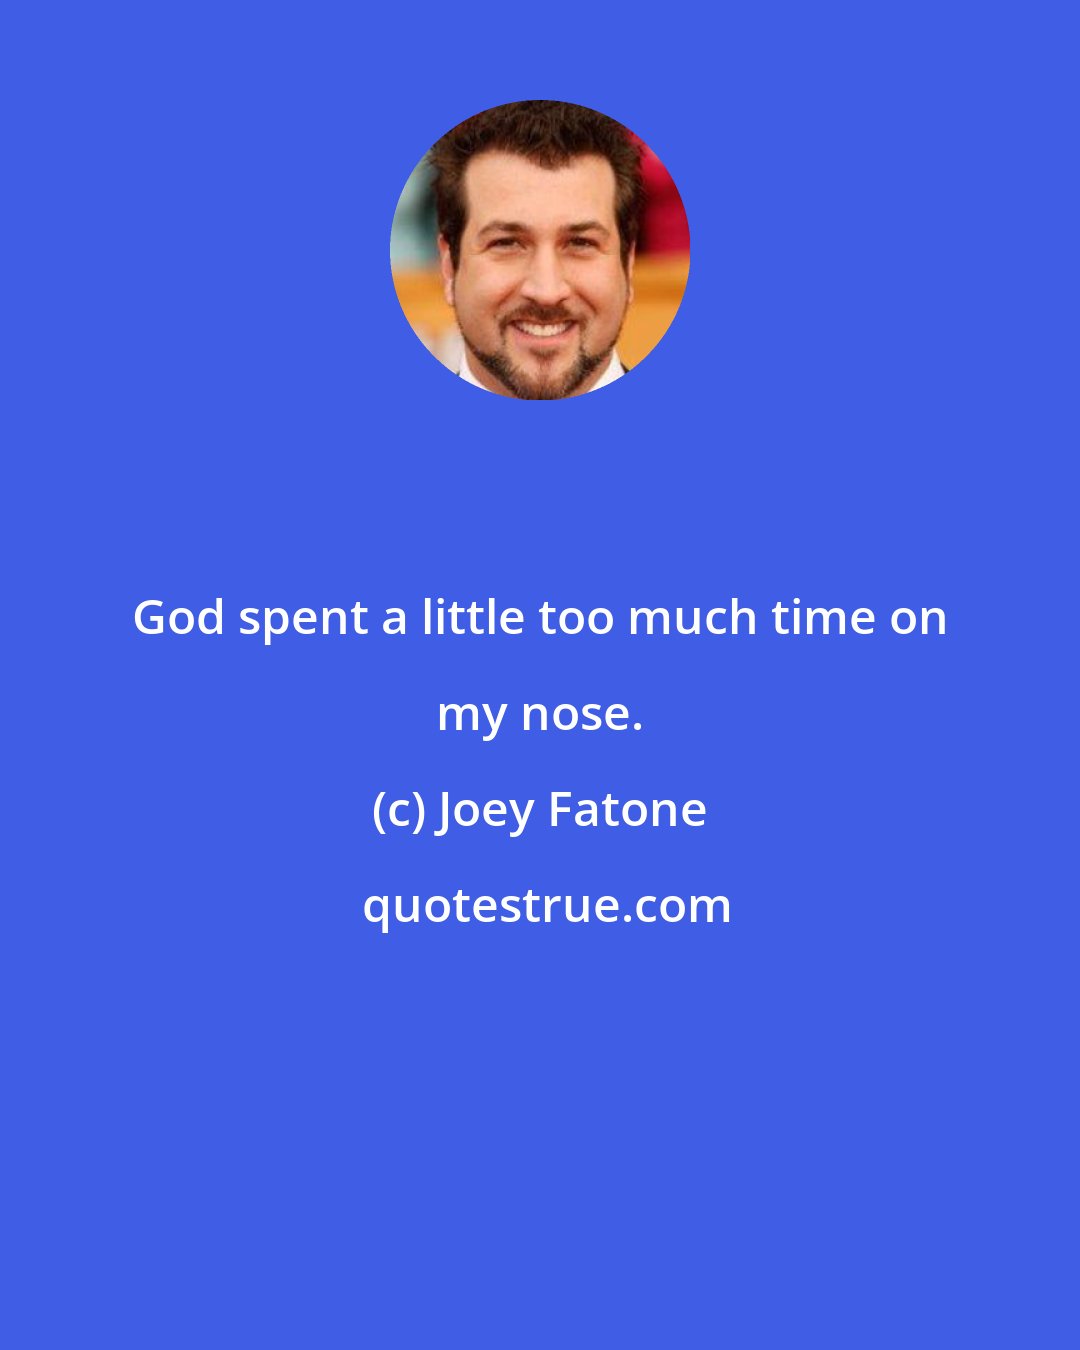 Joey Fatone: God spent a little too much time on my nose.